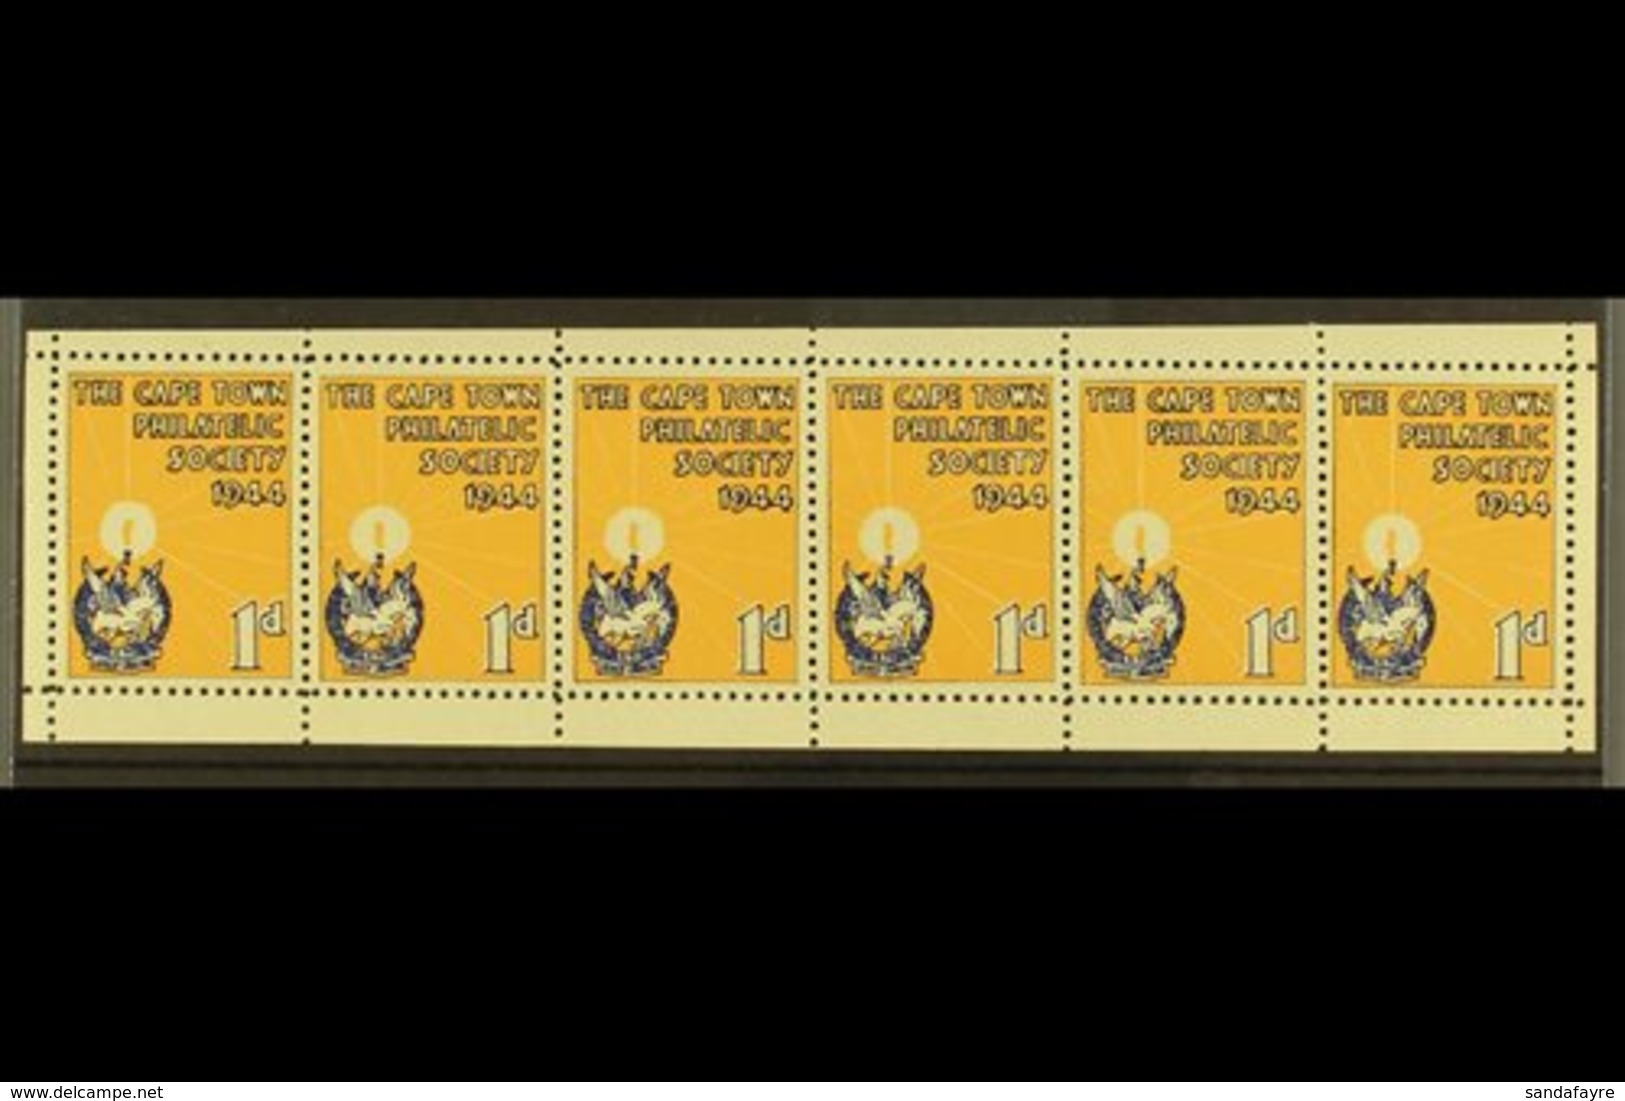 CINDERELLA LABEL  1944 "The Cape Town Philatelic Society" 1d Blue & Buff, Strip Of 6 Labels With Margins All Around, Gum - Ohne Zuordnung